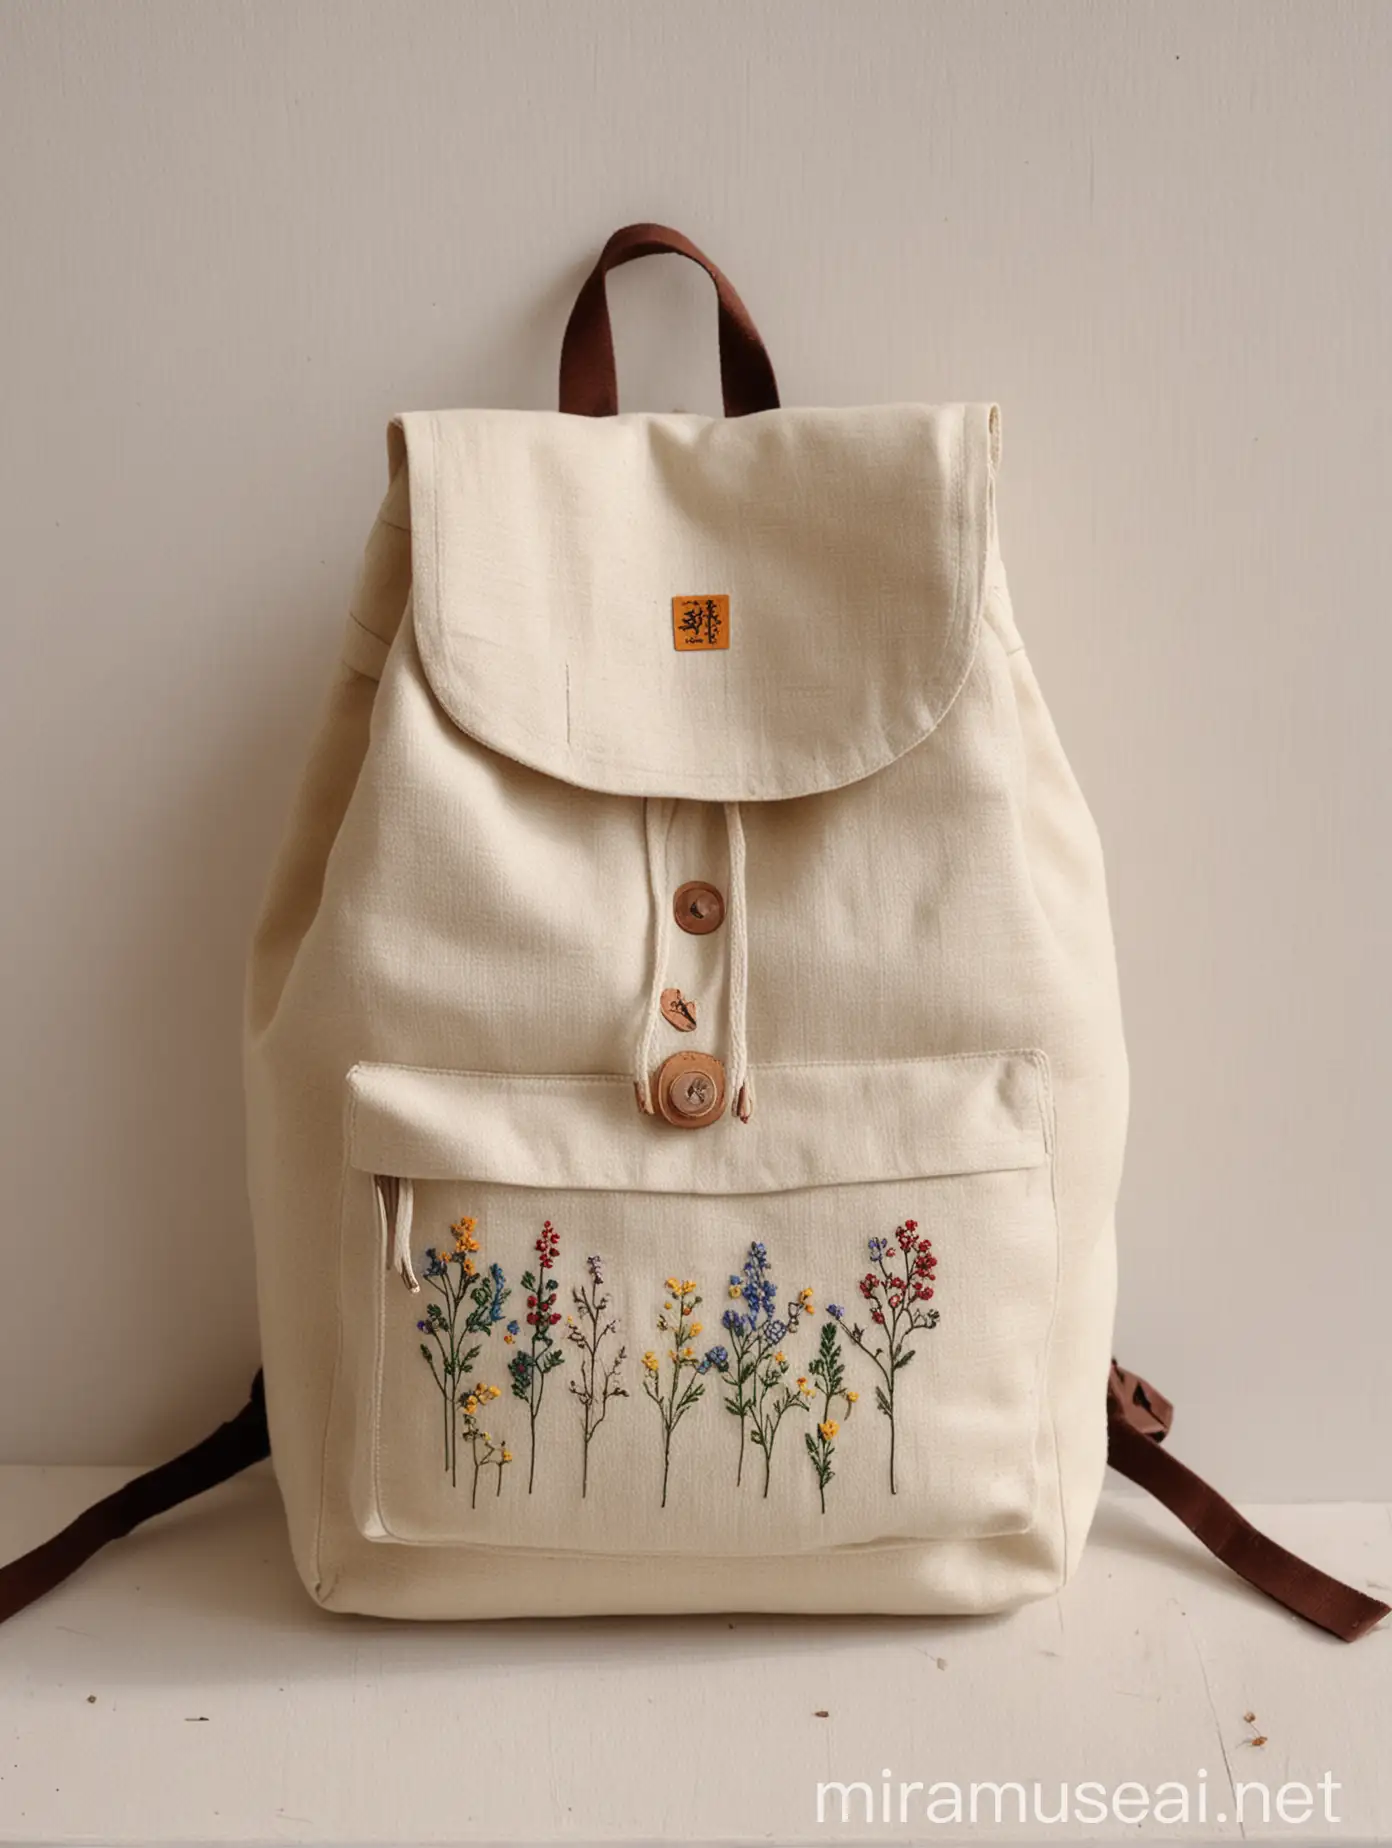 Linen Fabric Backpack with Cream Color and Delicate Embroidery